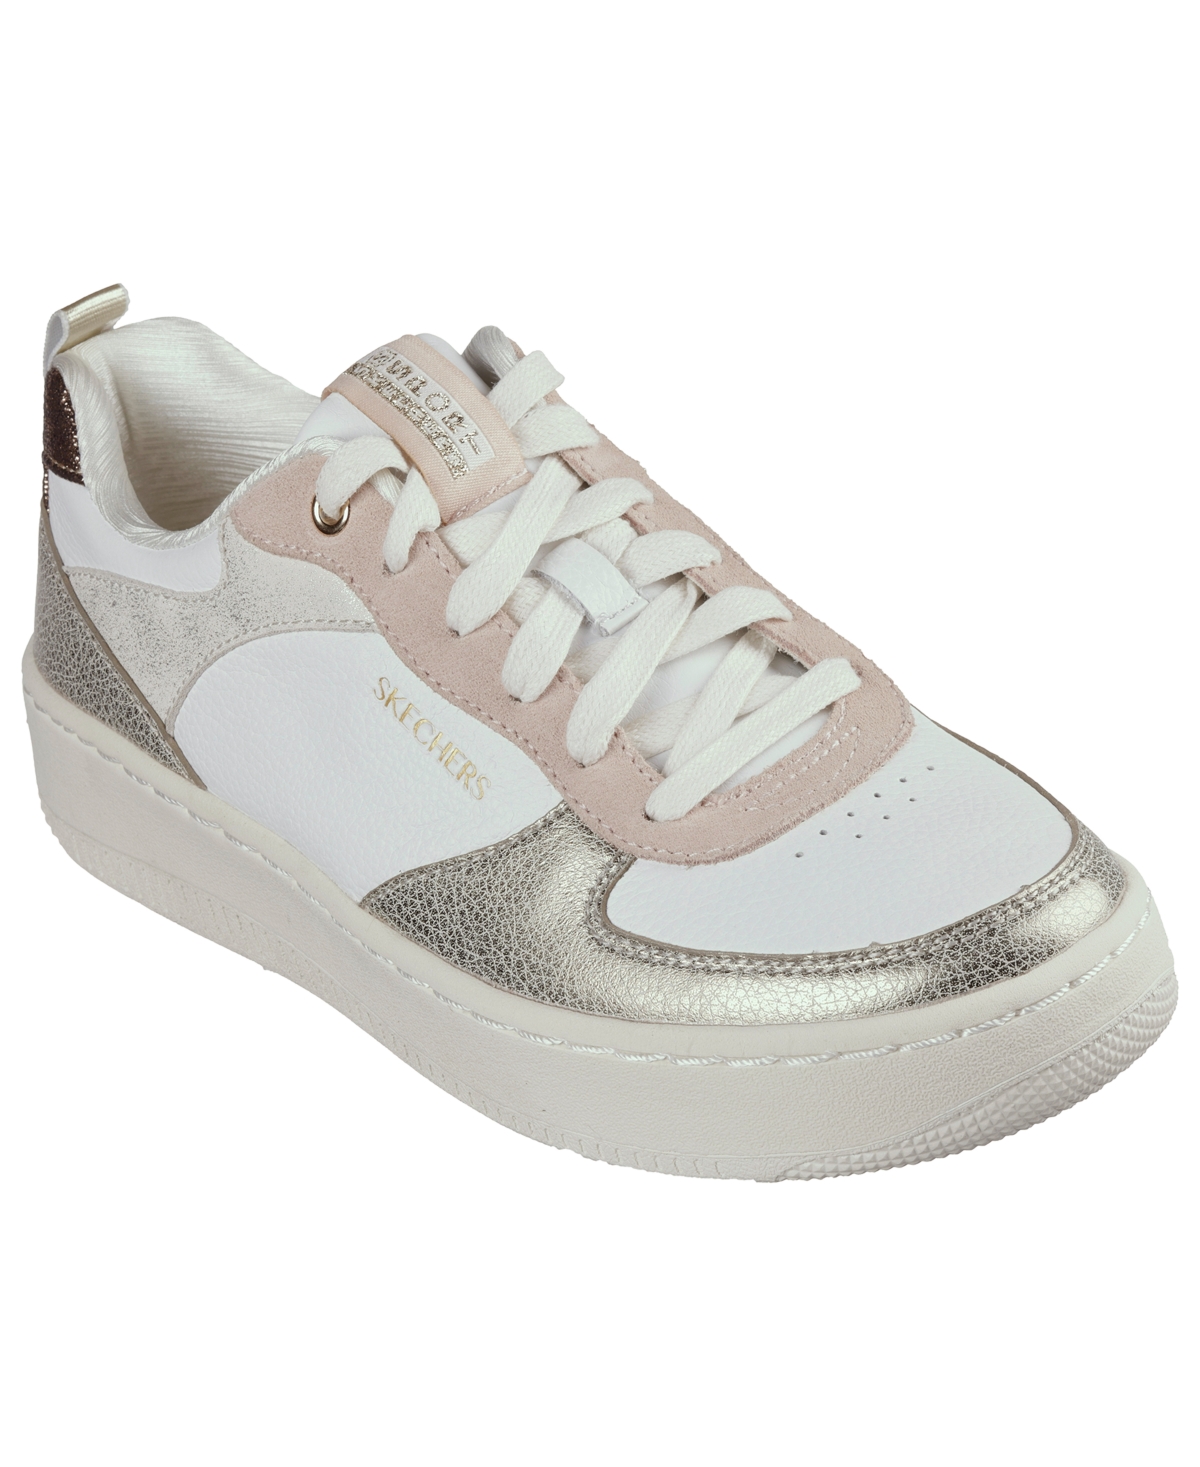 Women's Sport Court 92 - Sheer Shine Casual Sneakers from Finish Line - White/Pink